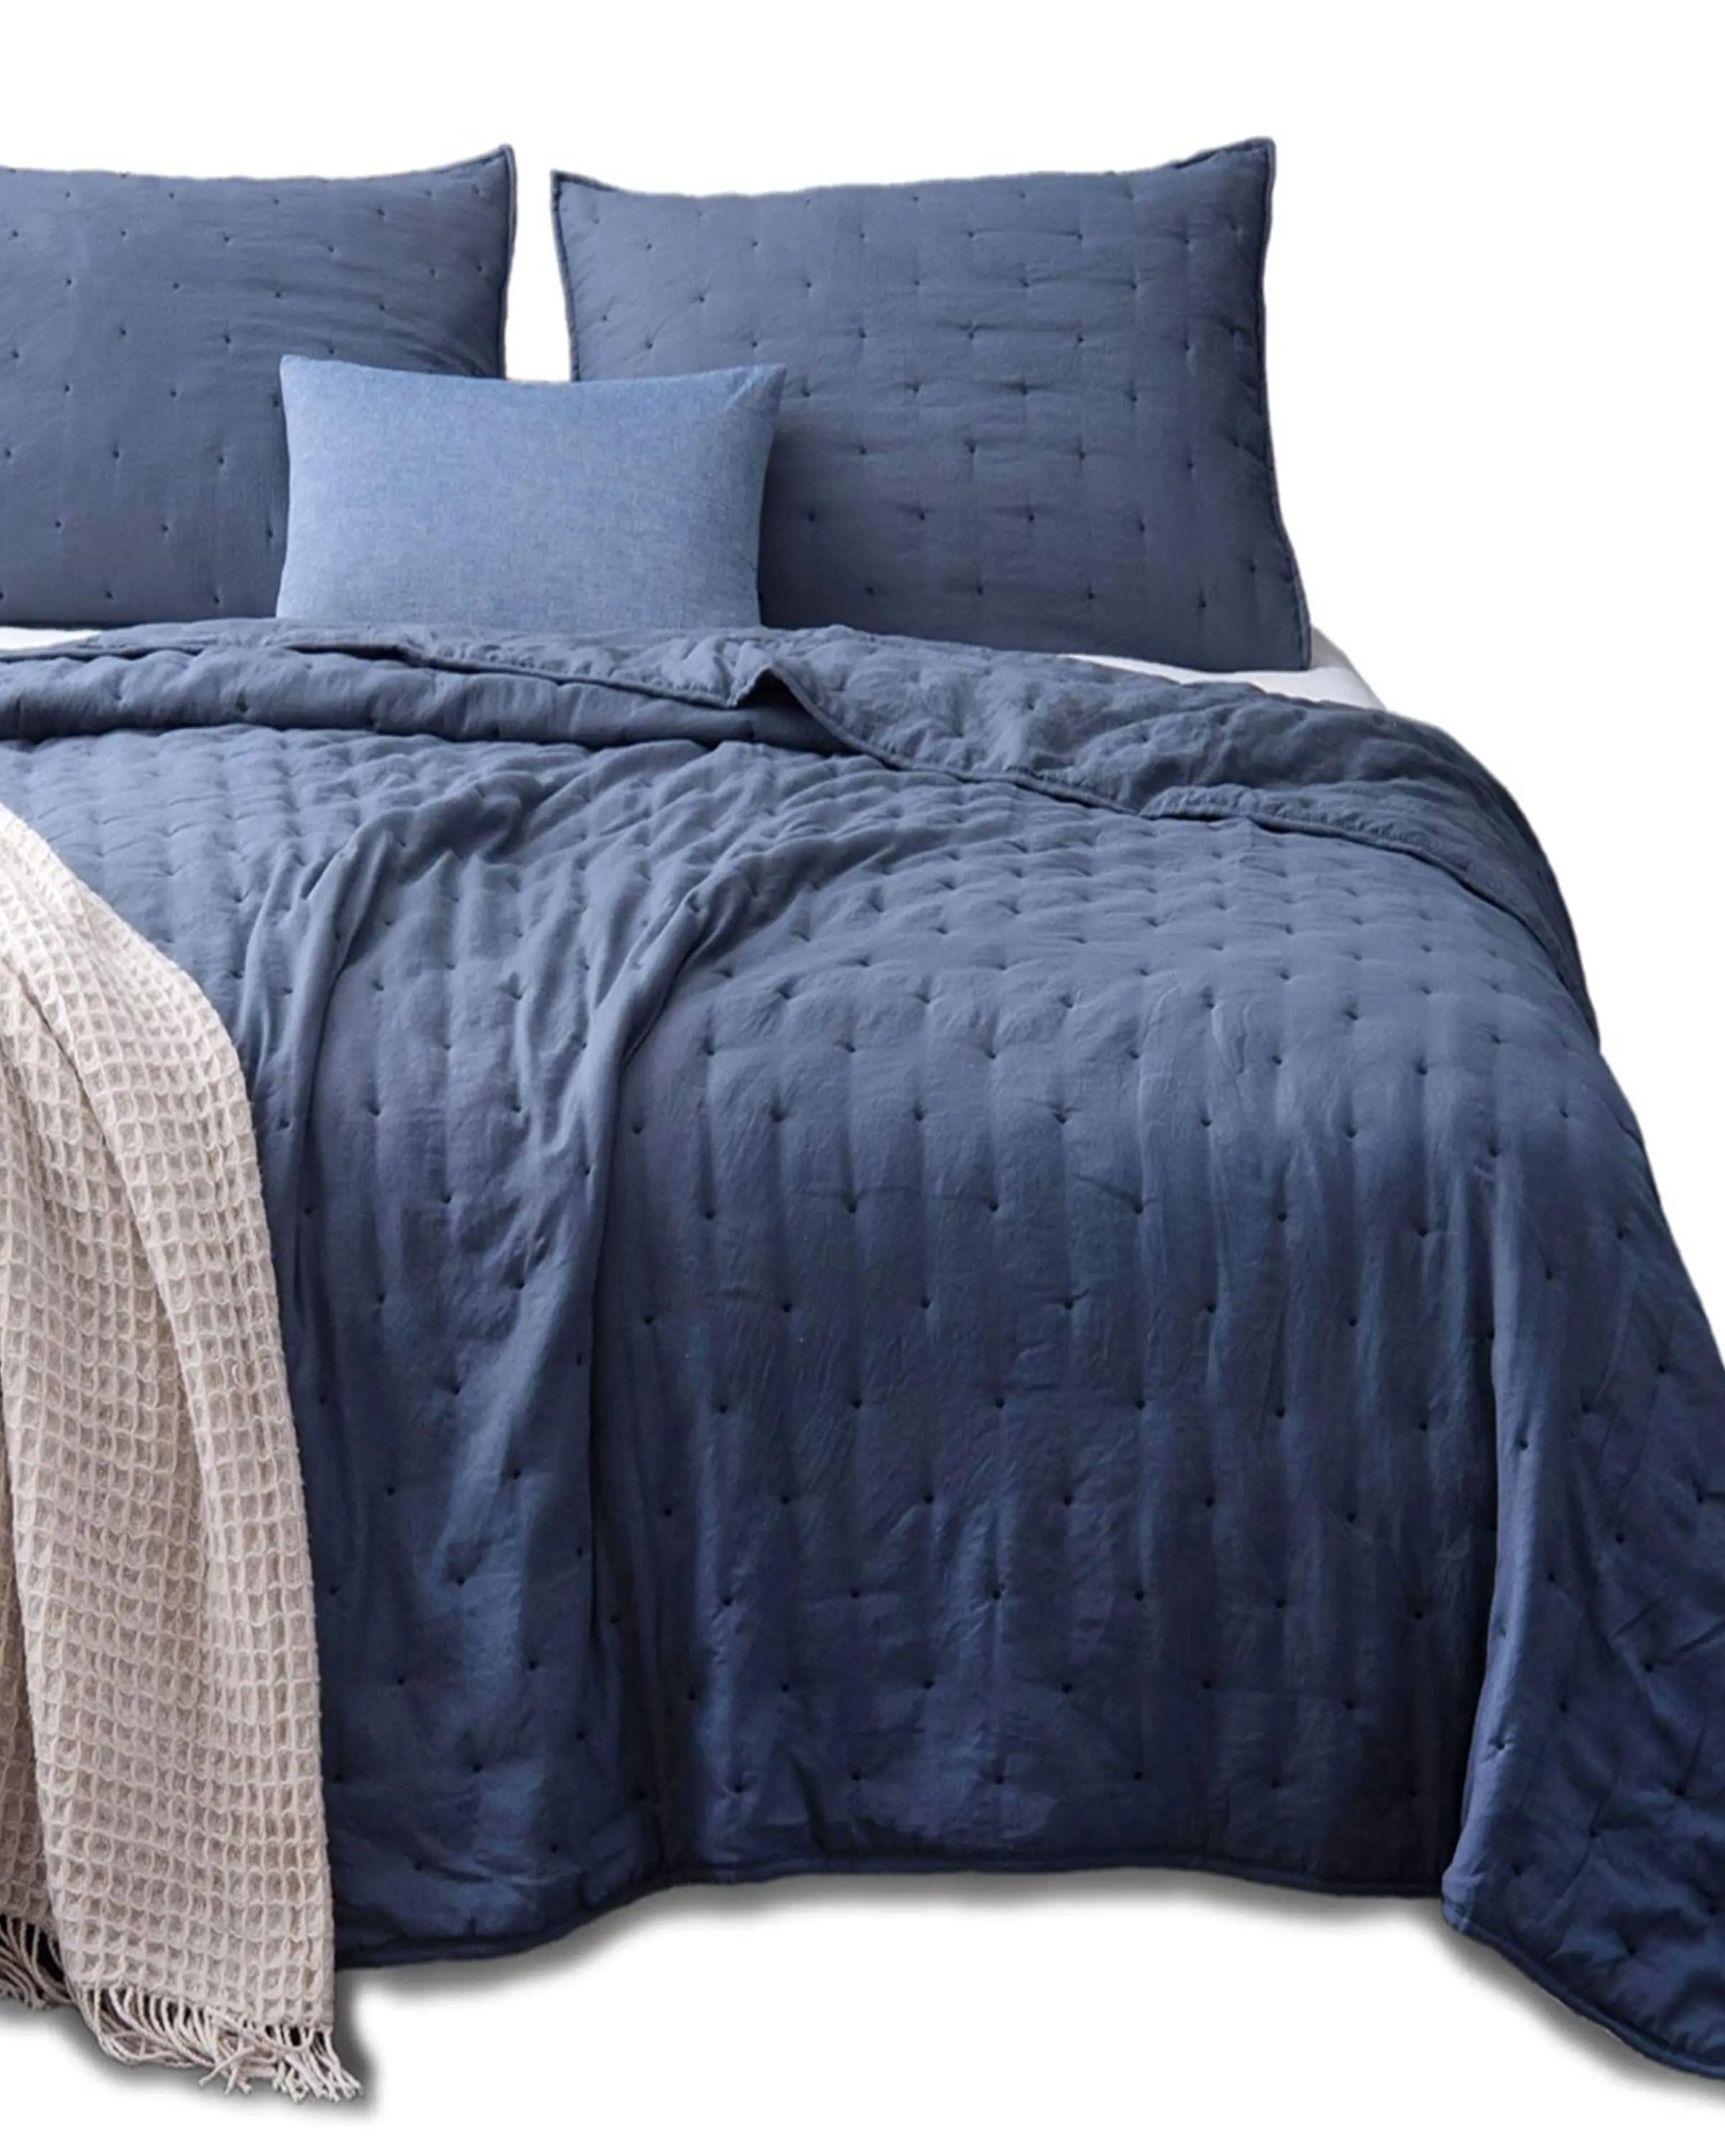 DELRON BLUE BEDDING ANGIE KRIPALANI DESIGN- ANGIE HOMES - ANGIES INDIA